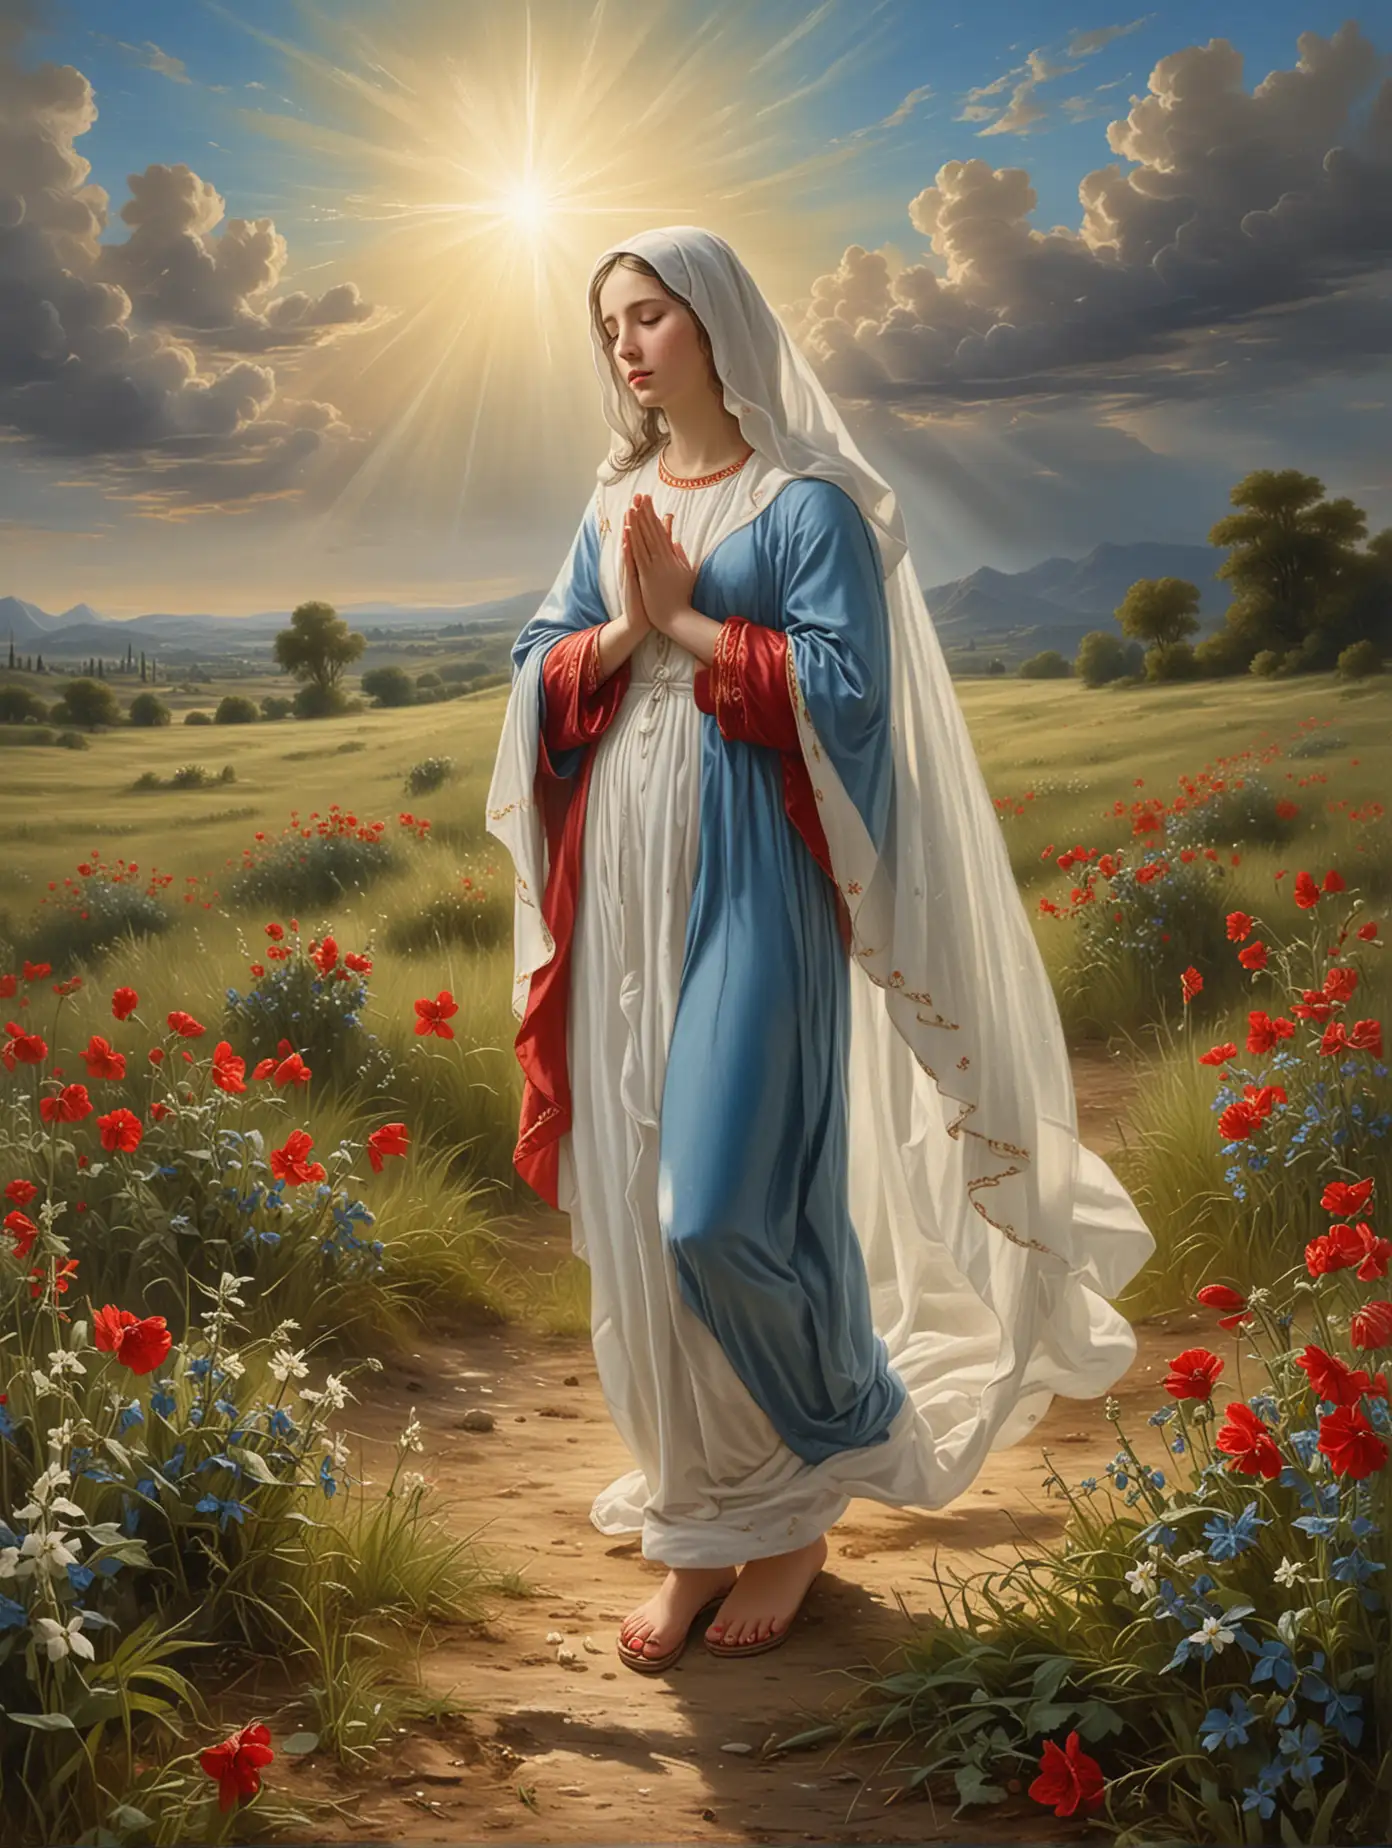 Young Virgin Mary Praying in Open Field